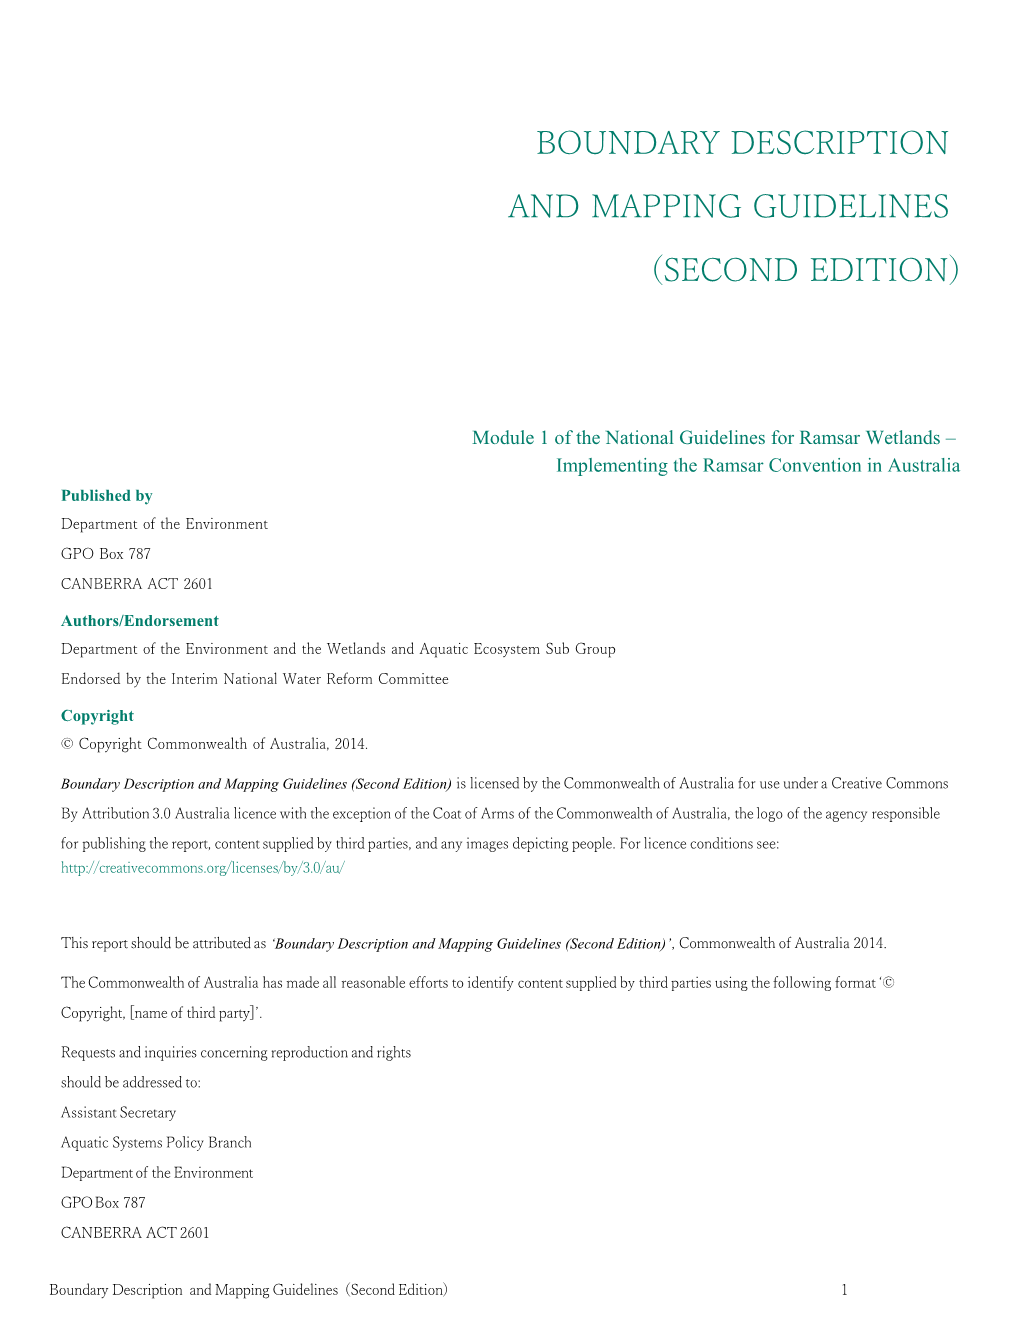 Boundary Description and Mapping Guidelines (Second Edition)